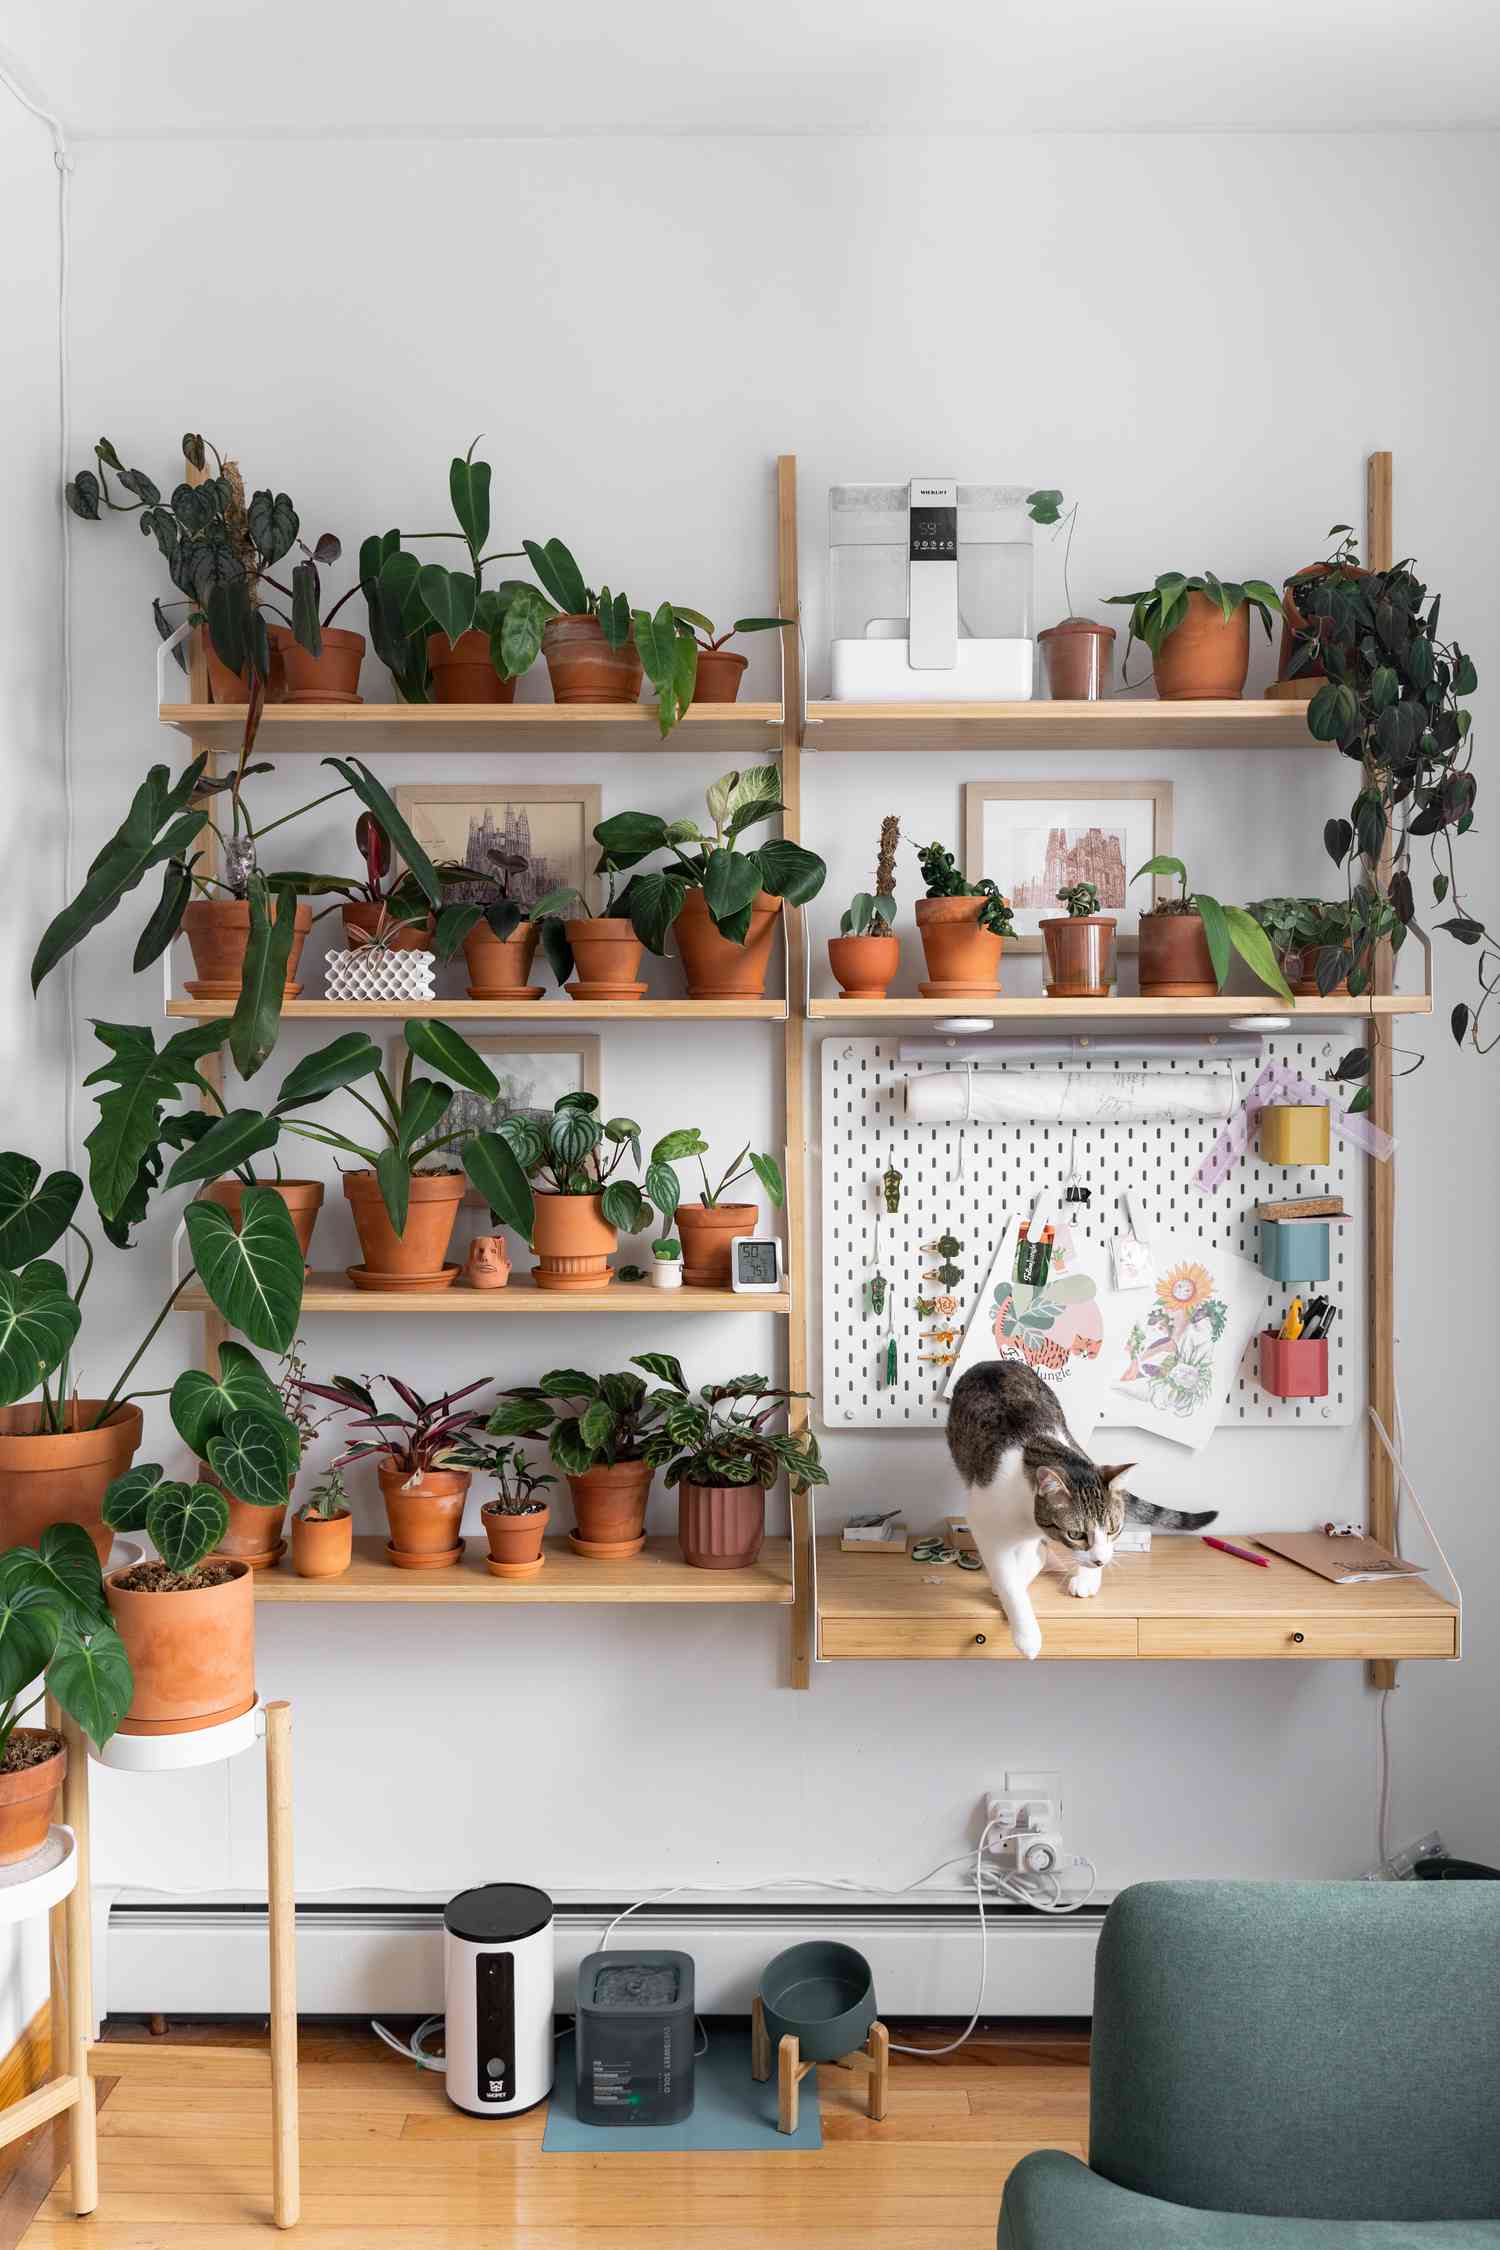 Vionna Wai's wall of plants in her NYC workspace